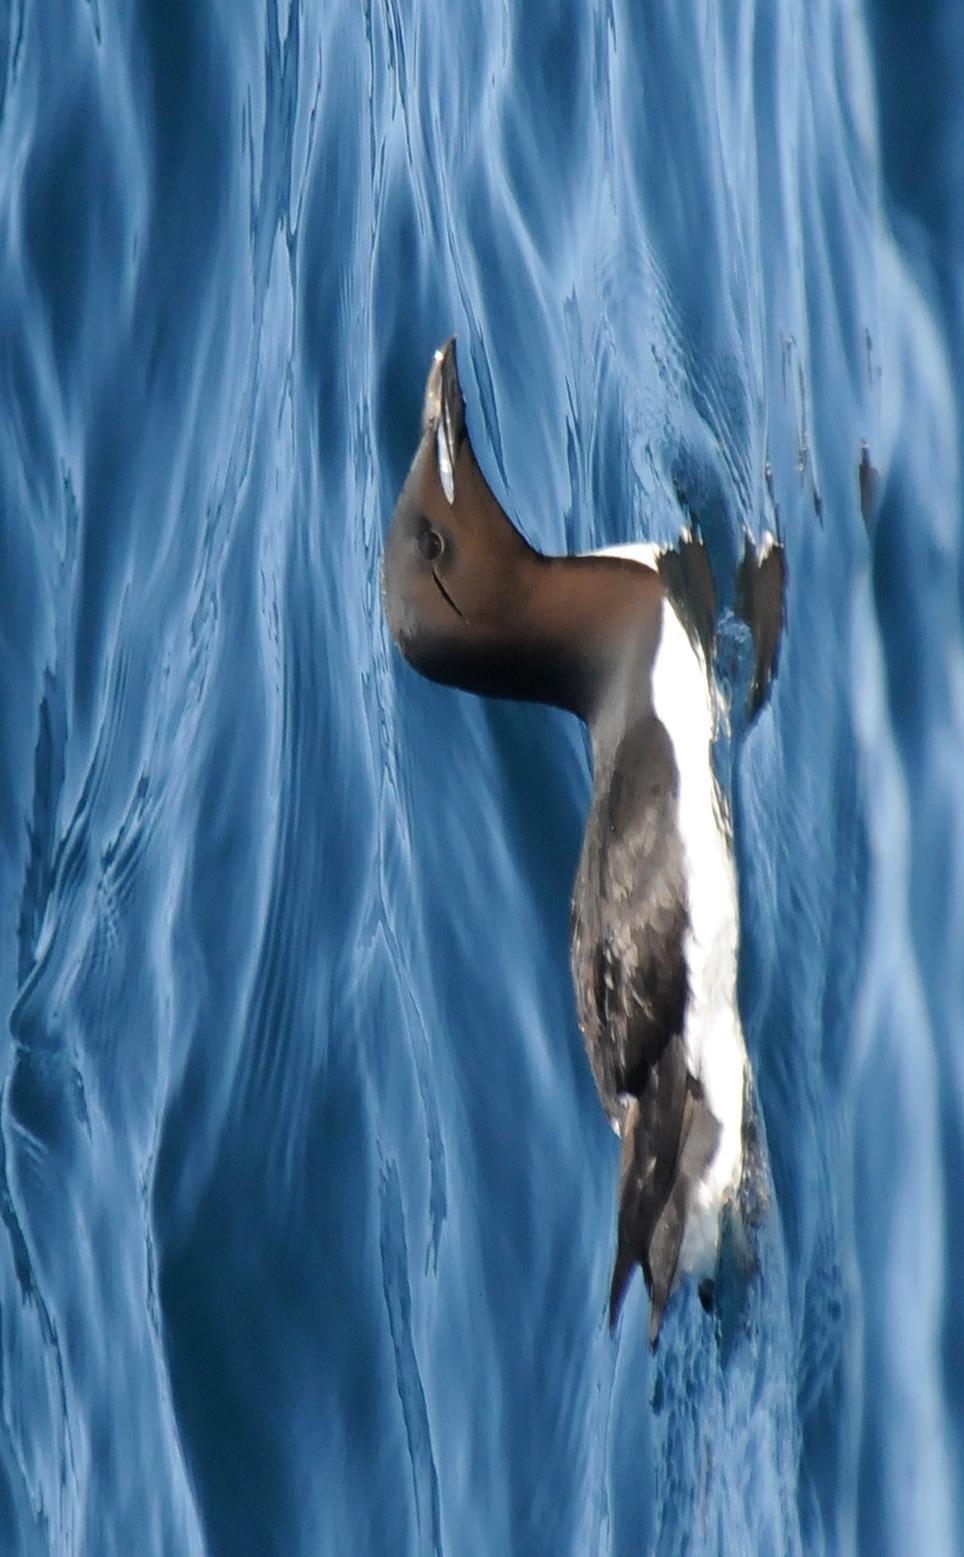 Thick-billed Murre Photo by Steven Mlodinow